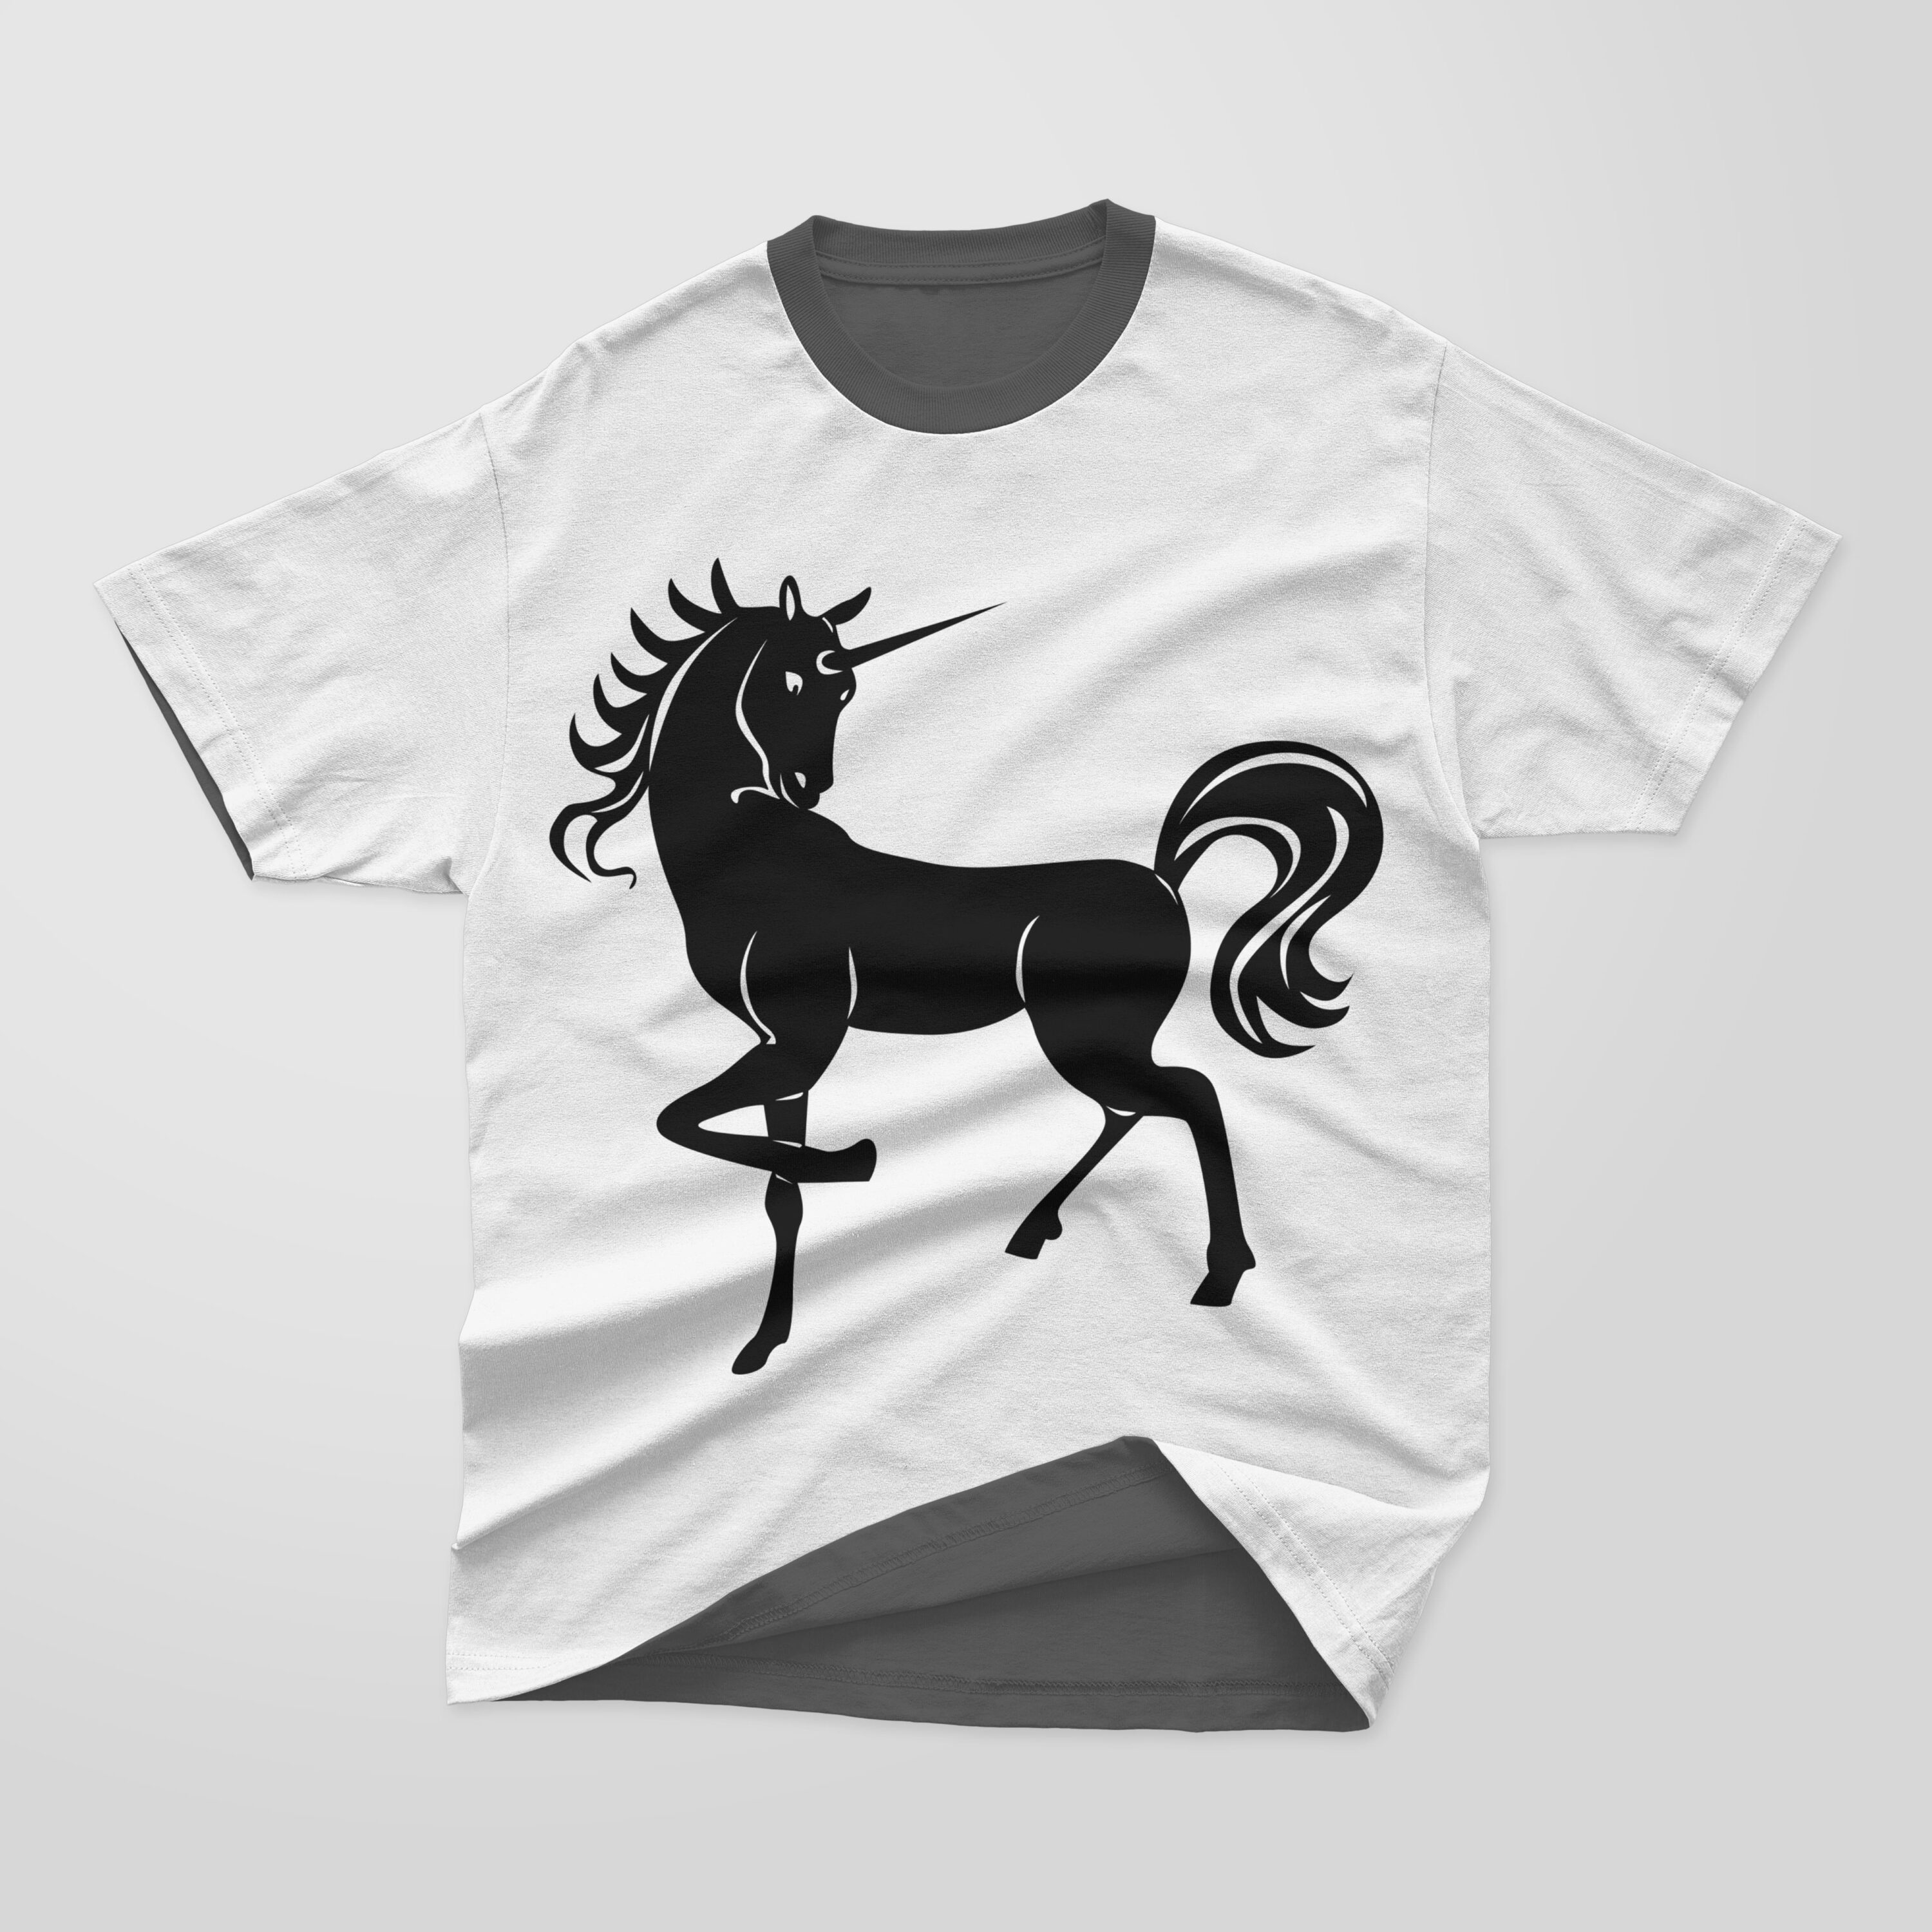 White and dark gray T-shirt with a dark gray collar and a black silhouette of a cute unicorn on a gray background.